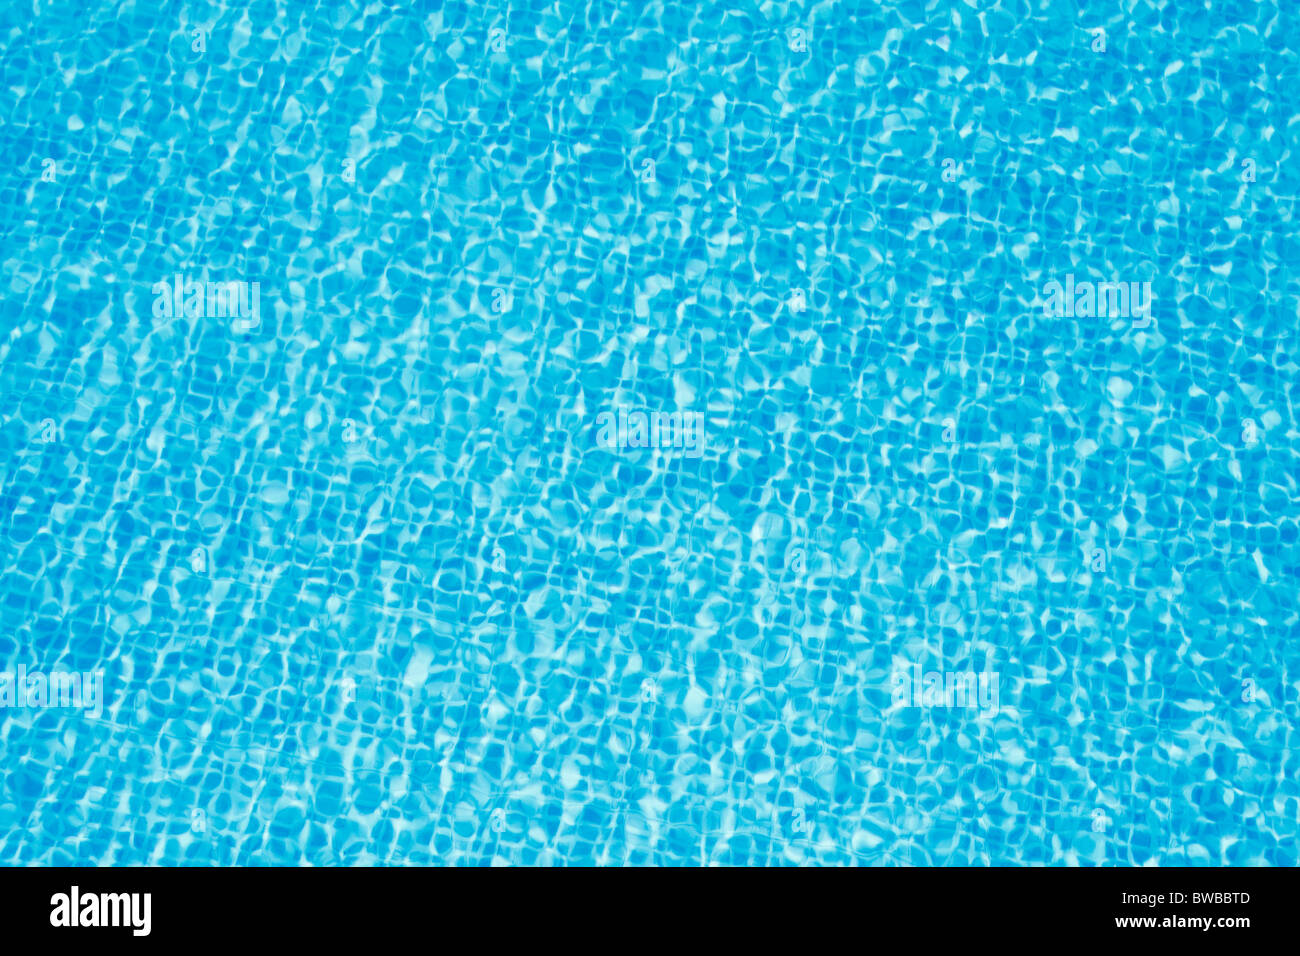 Clean blue water in pool Stock Photo